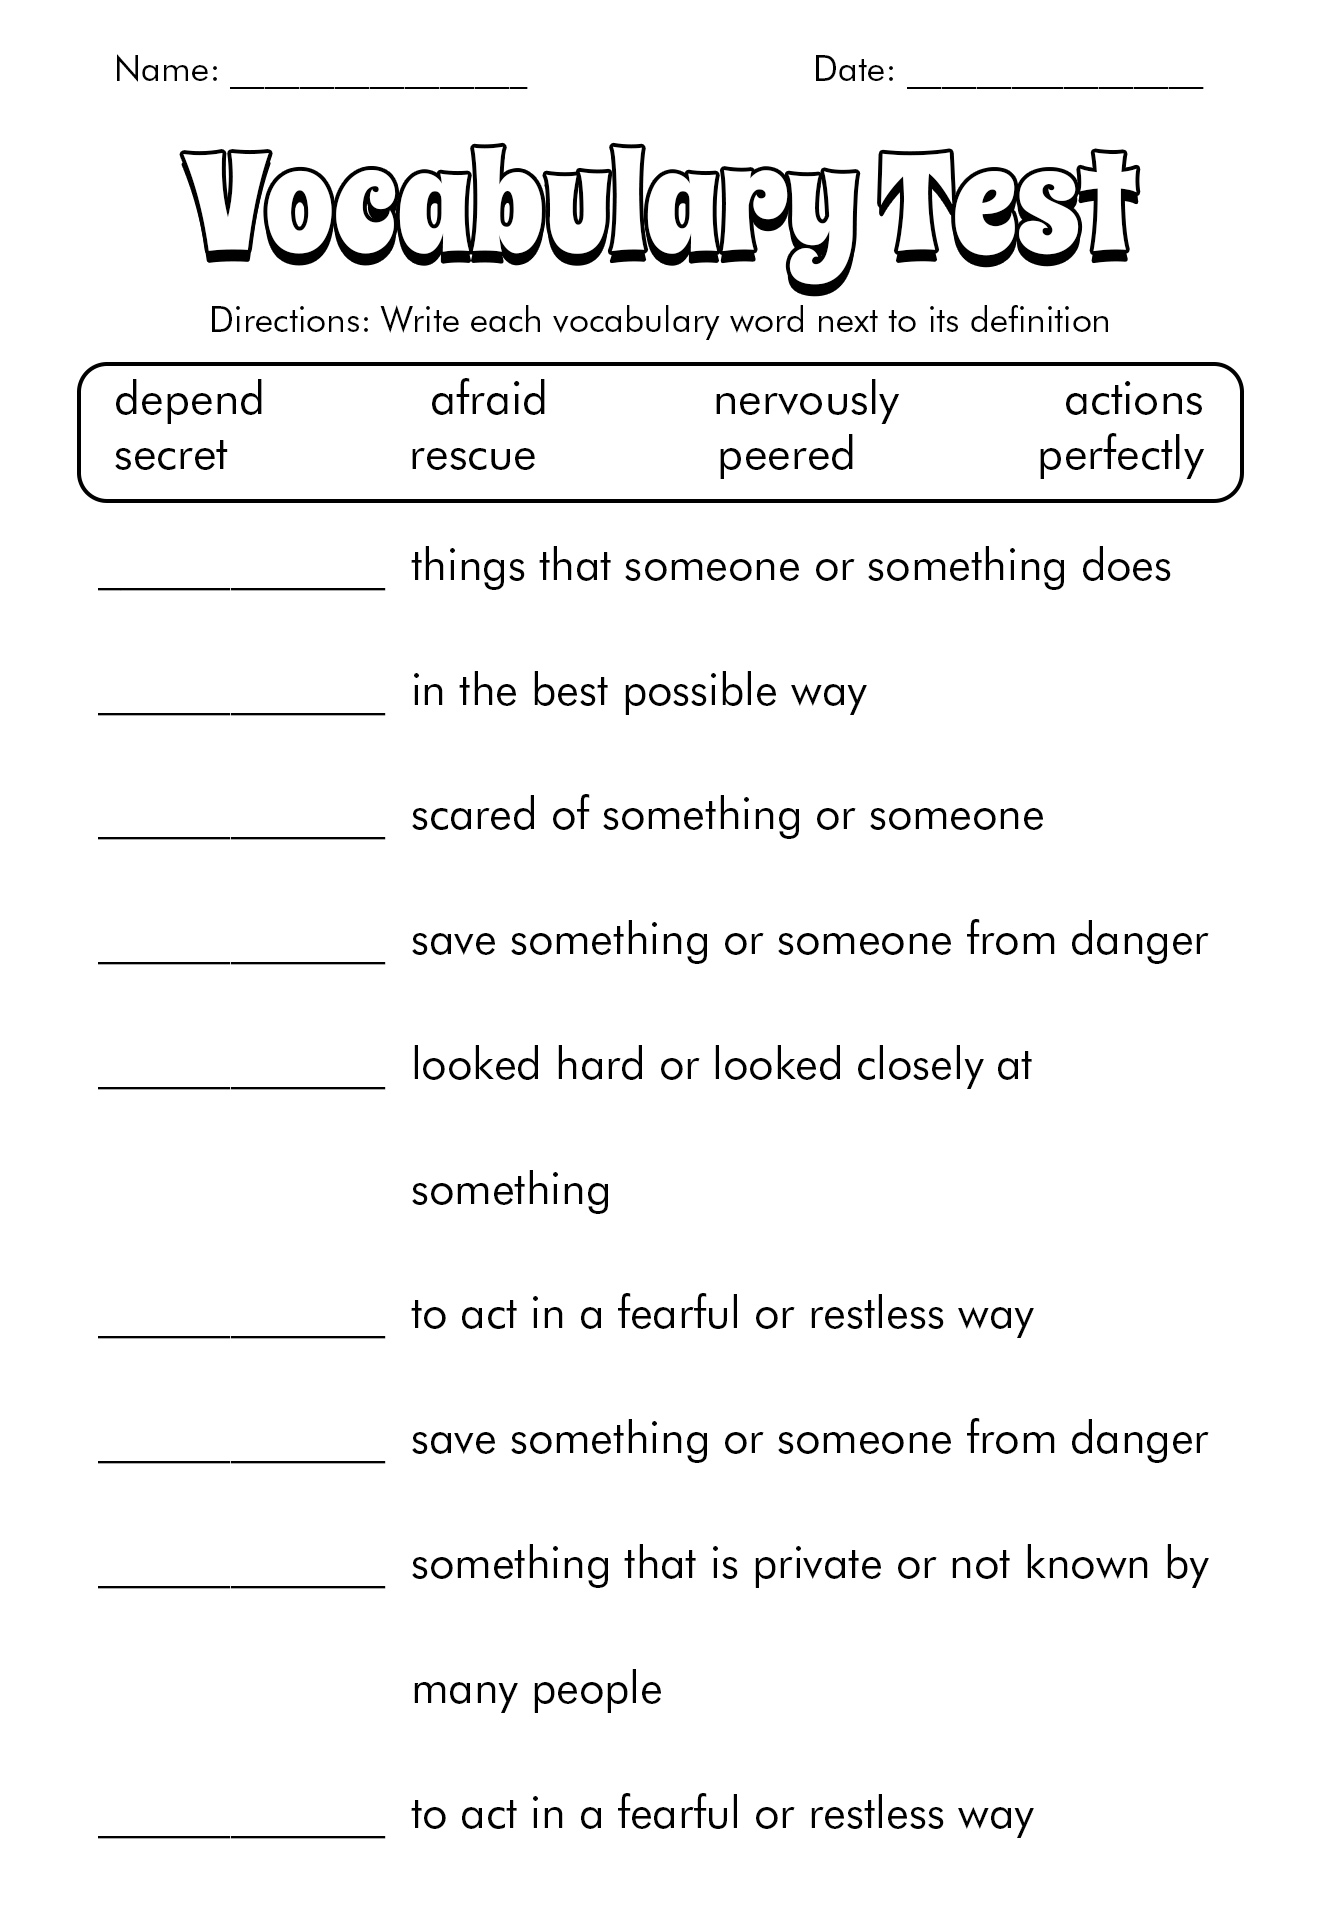 14 Best Images of Vocabulary Matching Worksheet Template ...